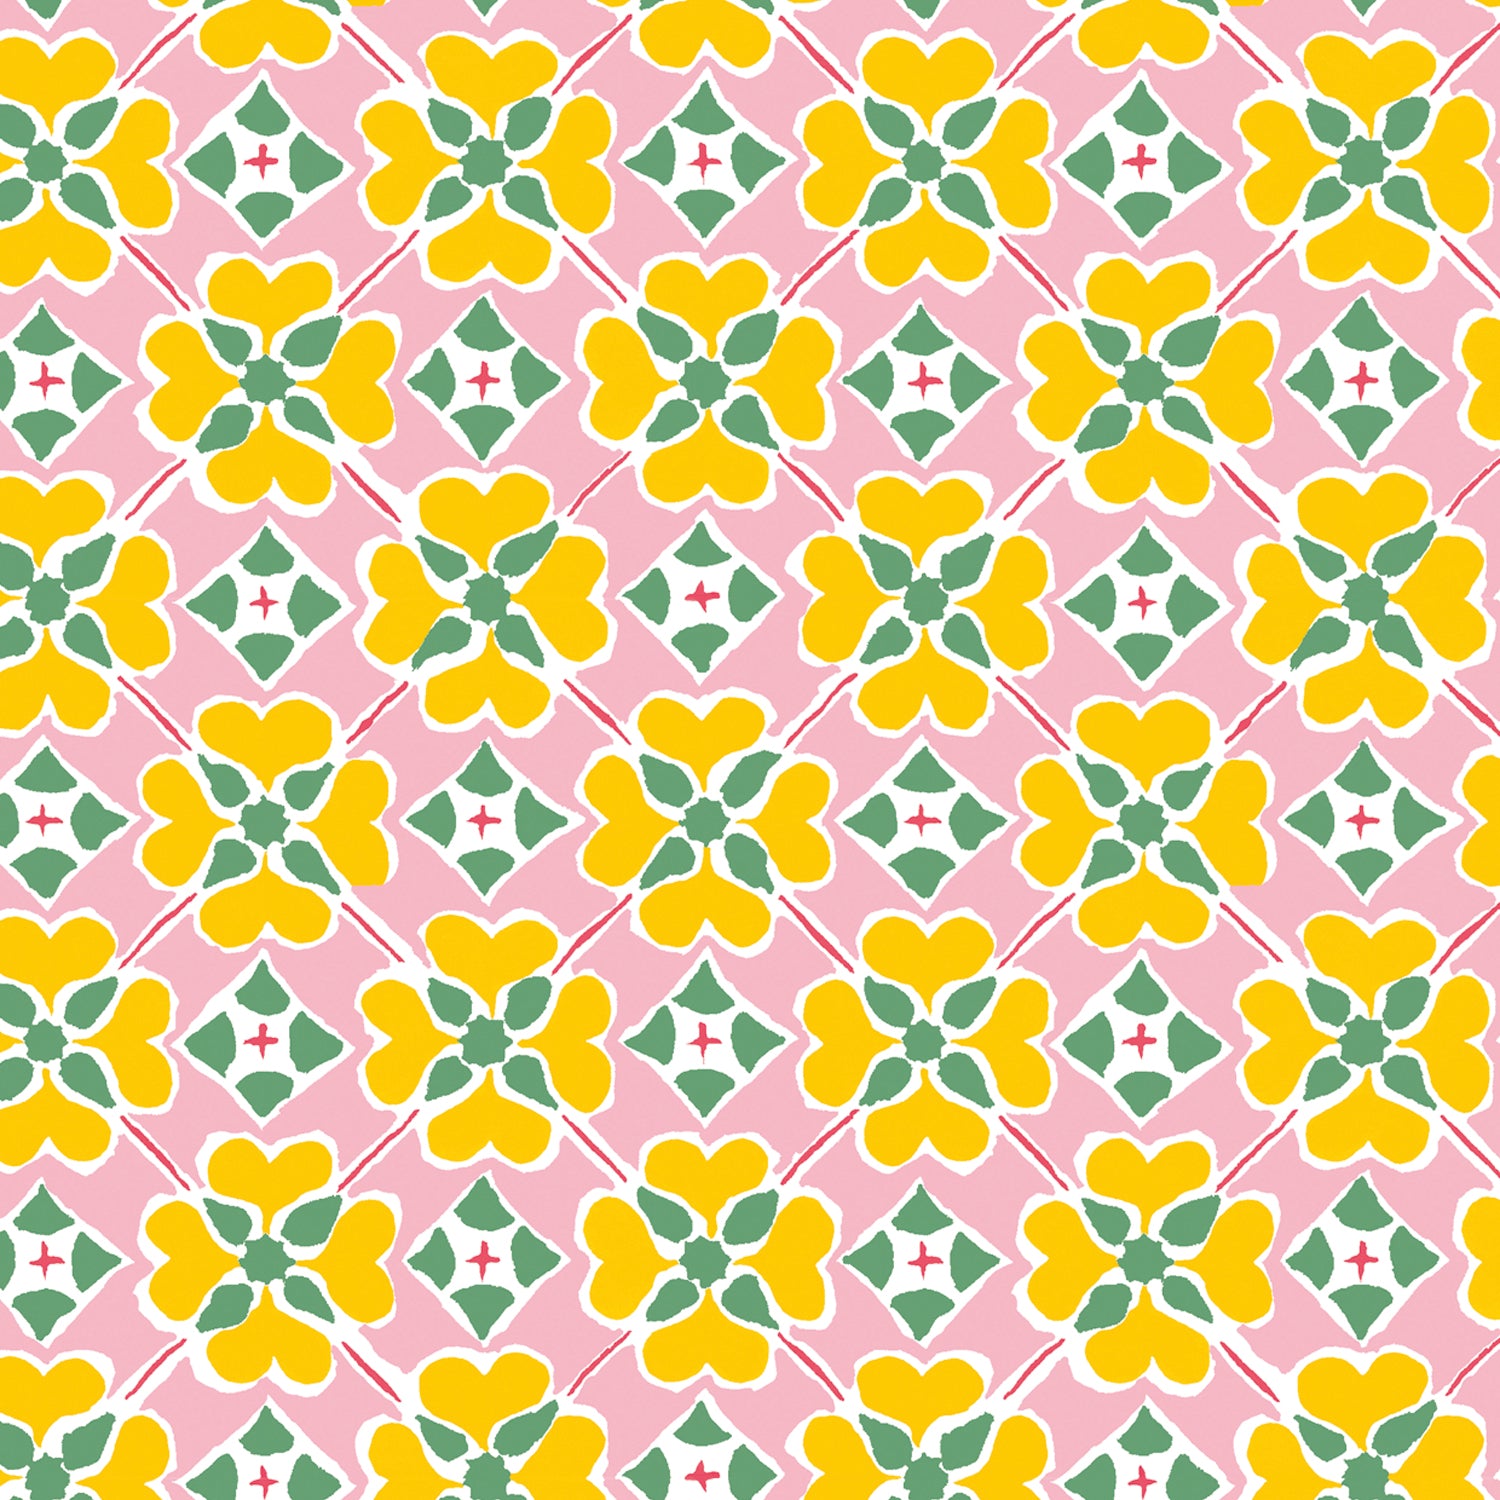 Detail of wallpaper in a floral lattice print in yellow, pink, green and white.